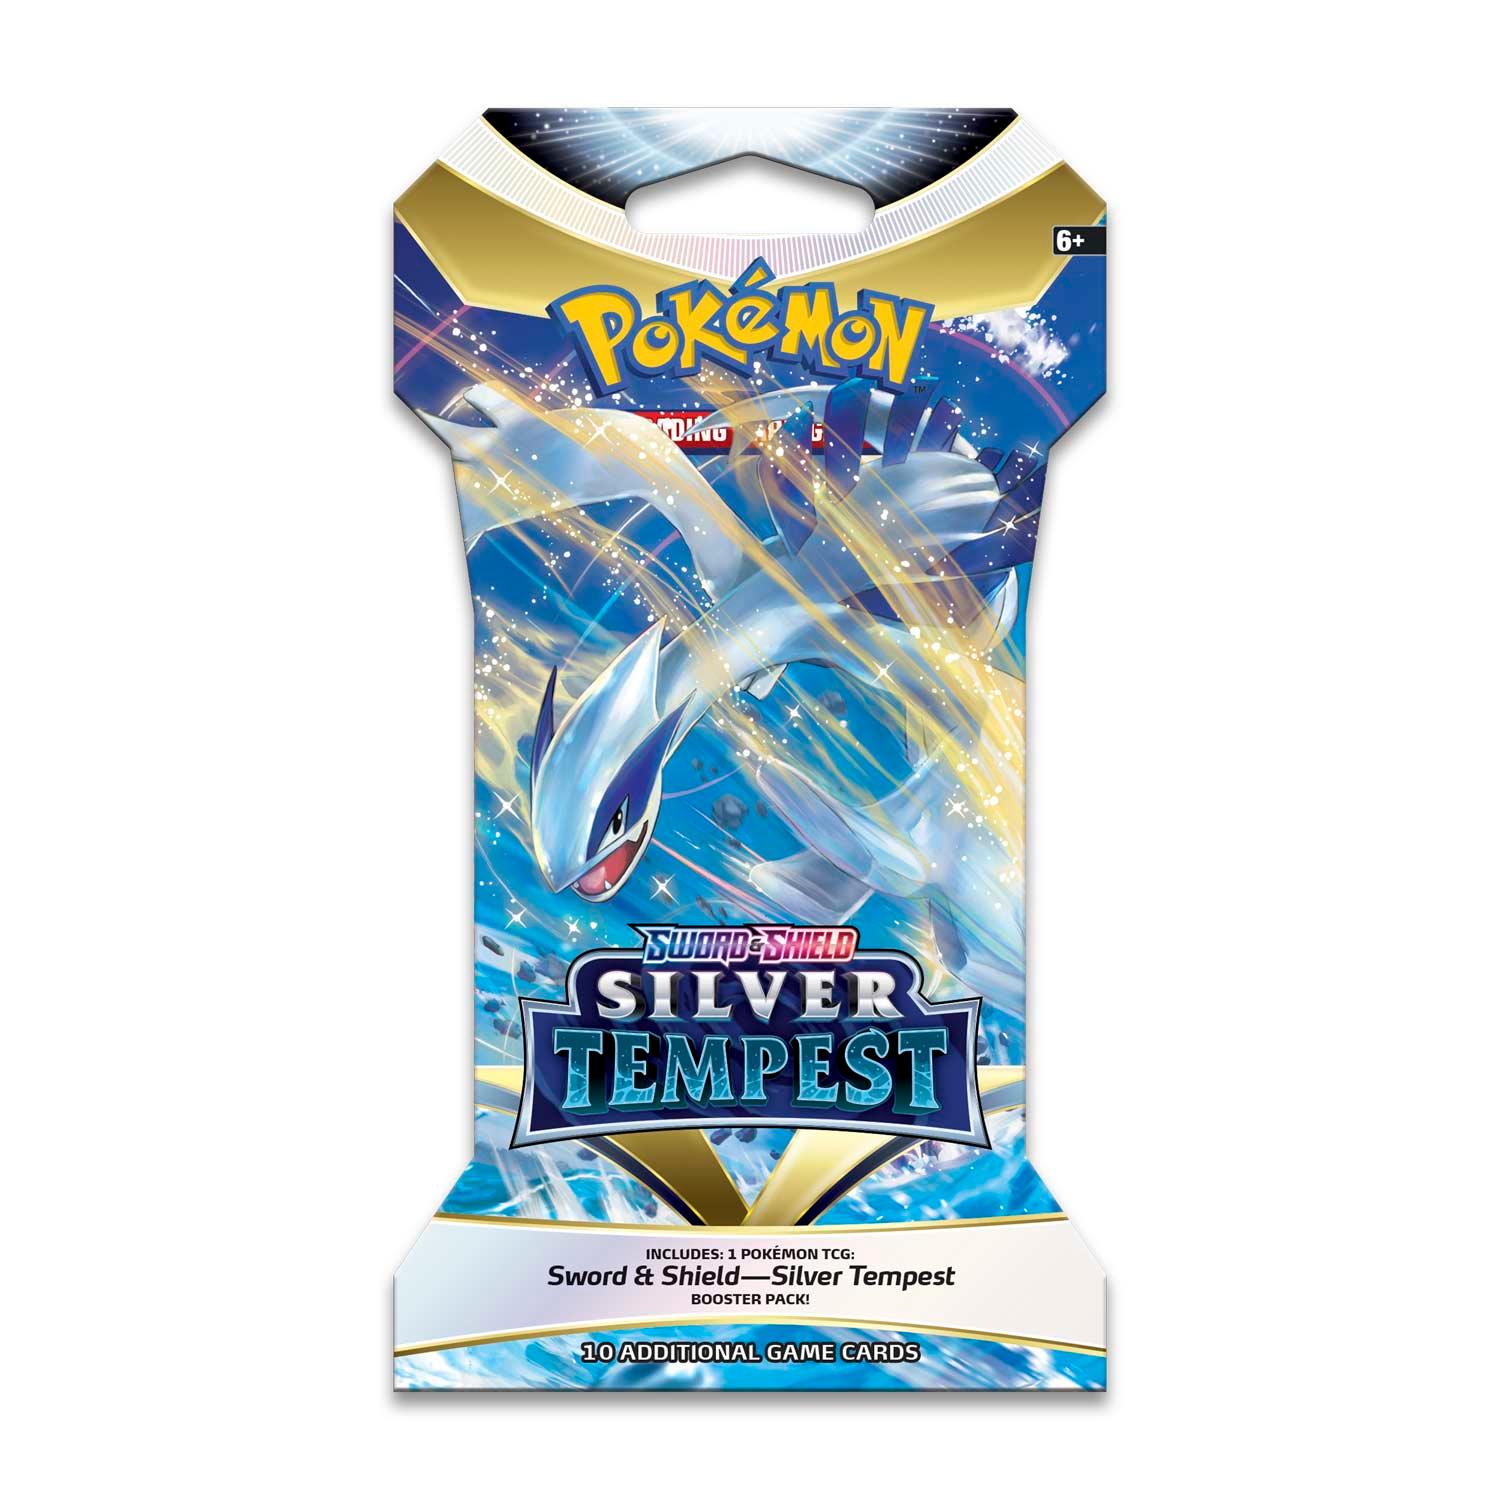 Pokemon Trading Cards Set of 10 Cards - Sword & Shield Silver Tempest Booster - BumbleToys - 14 Years & Up, 8-13 Years, Boys, Card & Board Games, Pokémon, Pre-Order, Puzzle & Board & Card Games